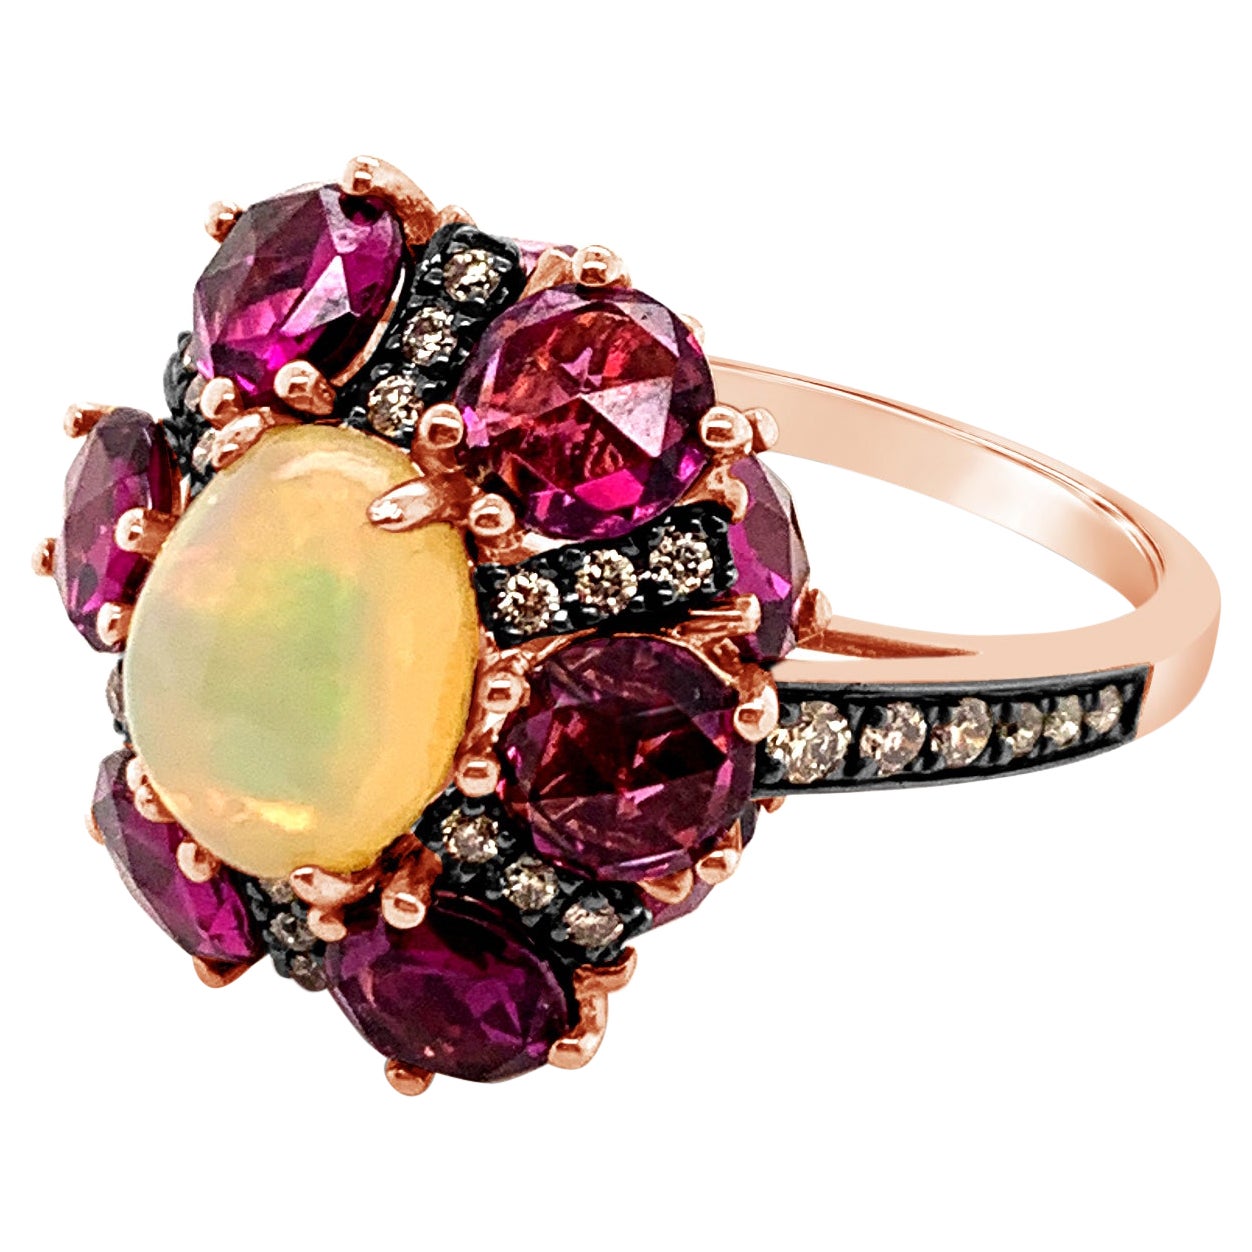 New LeVian Ring Opal Rhodolite Chocolate Diamonds 14K Strawberry Gold For Sale